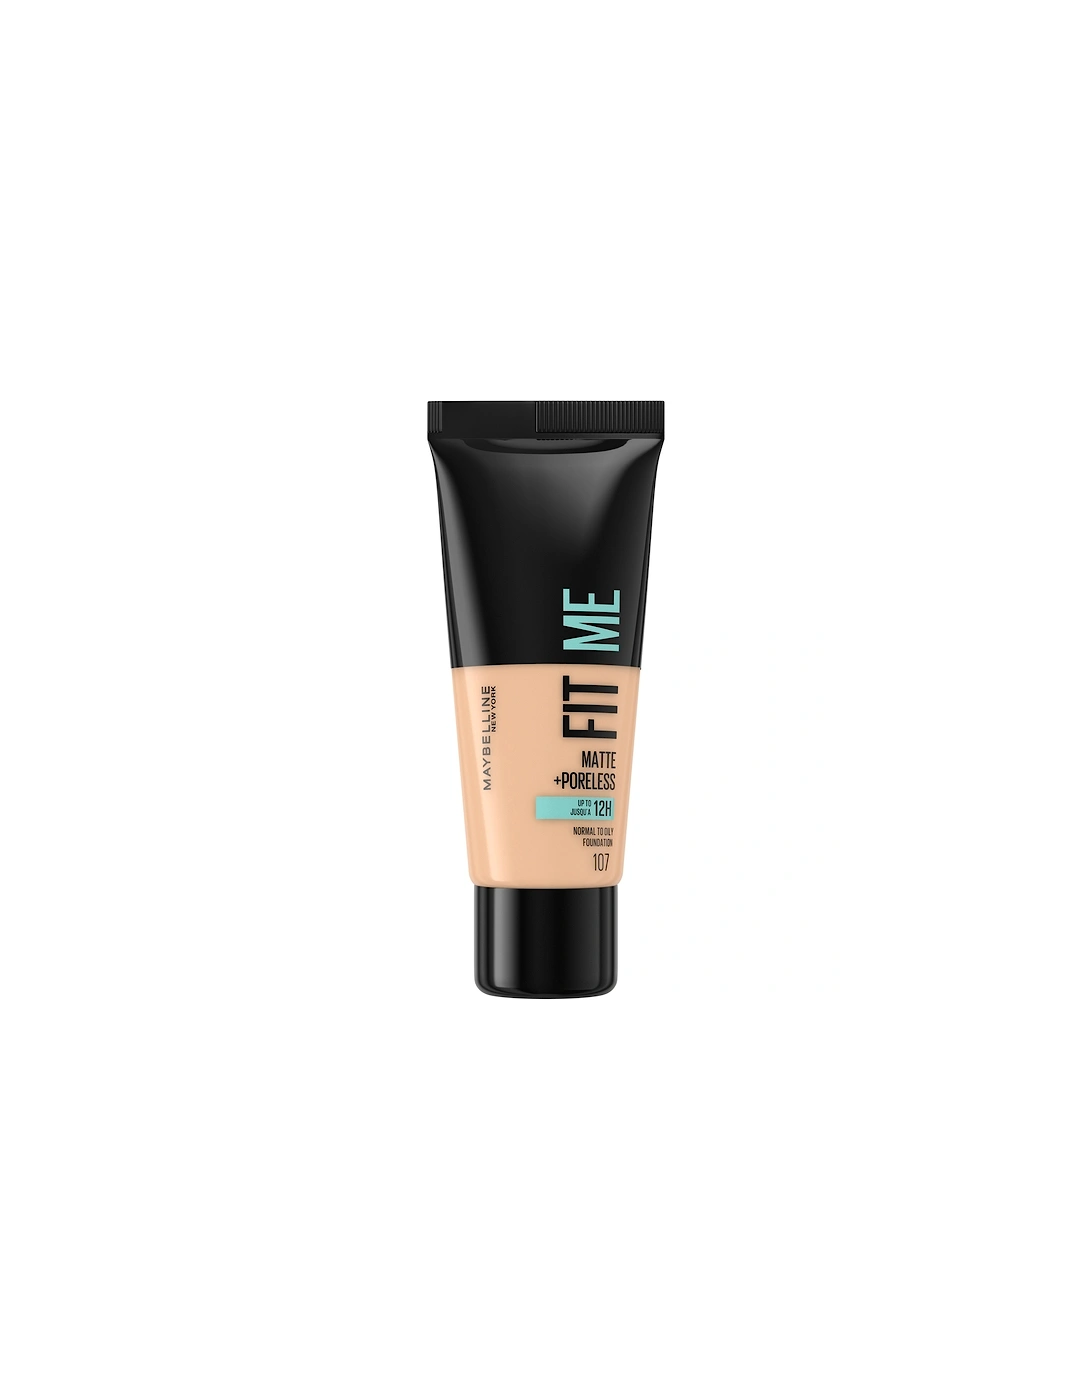 Fit Me! Matte and Poreless Foundation - 107 Rose Beige - - Fit Me! Matte and Poreless Foundation 30ml (Various Shades) - Foundation - Fit Me! Matte and Poreless Foundation 30ml (Various Shades) - Tina - Fit Me! Matte and Poreless Foundation 30ml (Various Shades) - Jo, 2 of 1